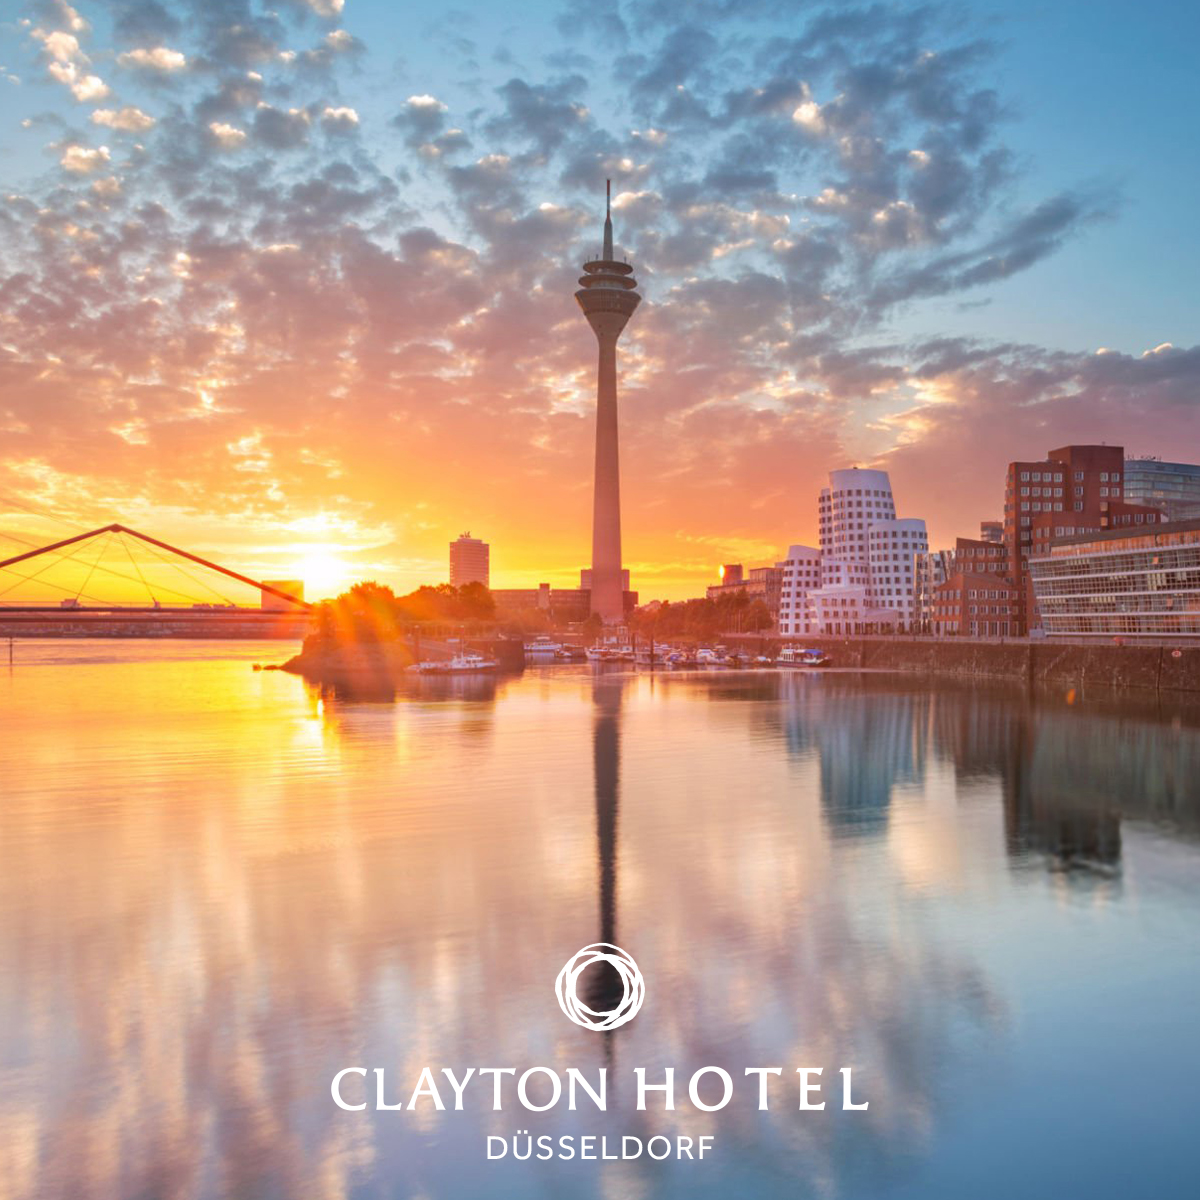 We’re very excited to be introducing our first hotel in Germany and look forward to welcoming you all to Clayton Hotel Düsseldorf!🇩🇪 @ClaytonHotelDus For more information visit: claytonhotelduesseldorf.com #ClaytonHotels #ClaytonHotelDüsseldorf #Germany